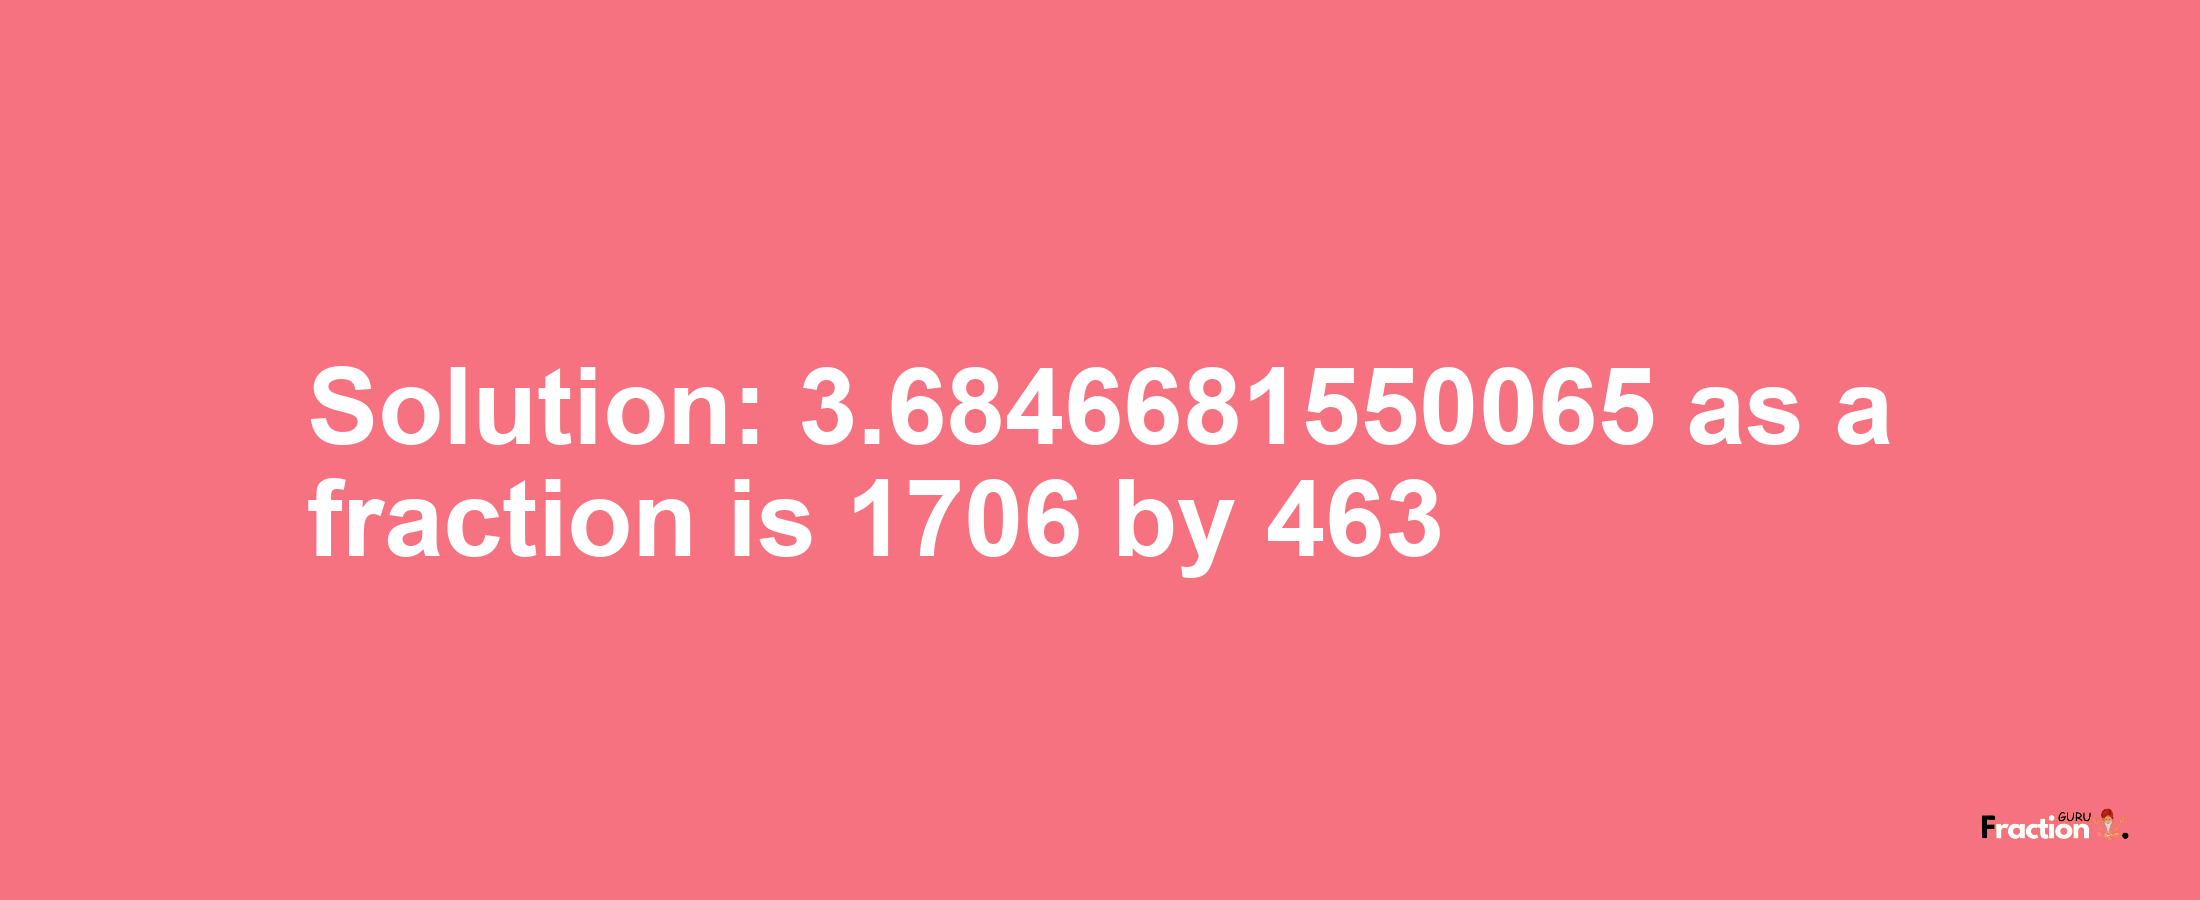 Solution:3.6846681550065 as a fraction is 1706/463